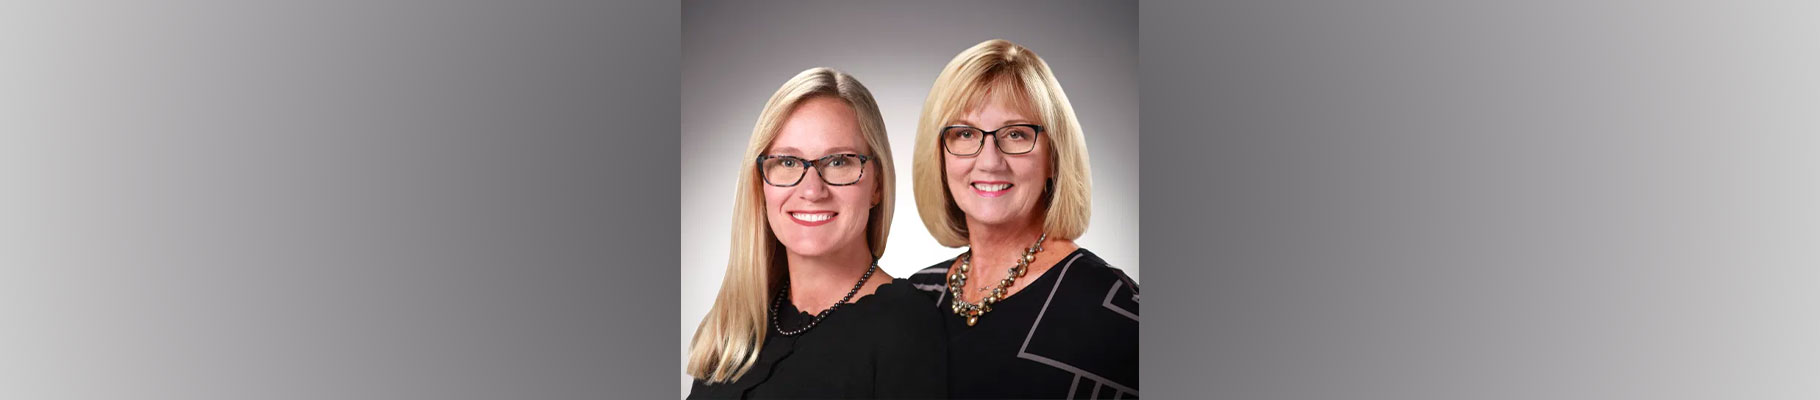 Chari Miles and Mindi Paruta Join Water Pointe Realty Group